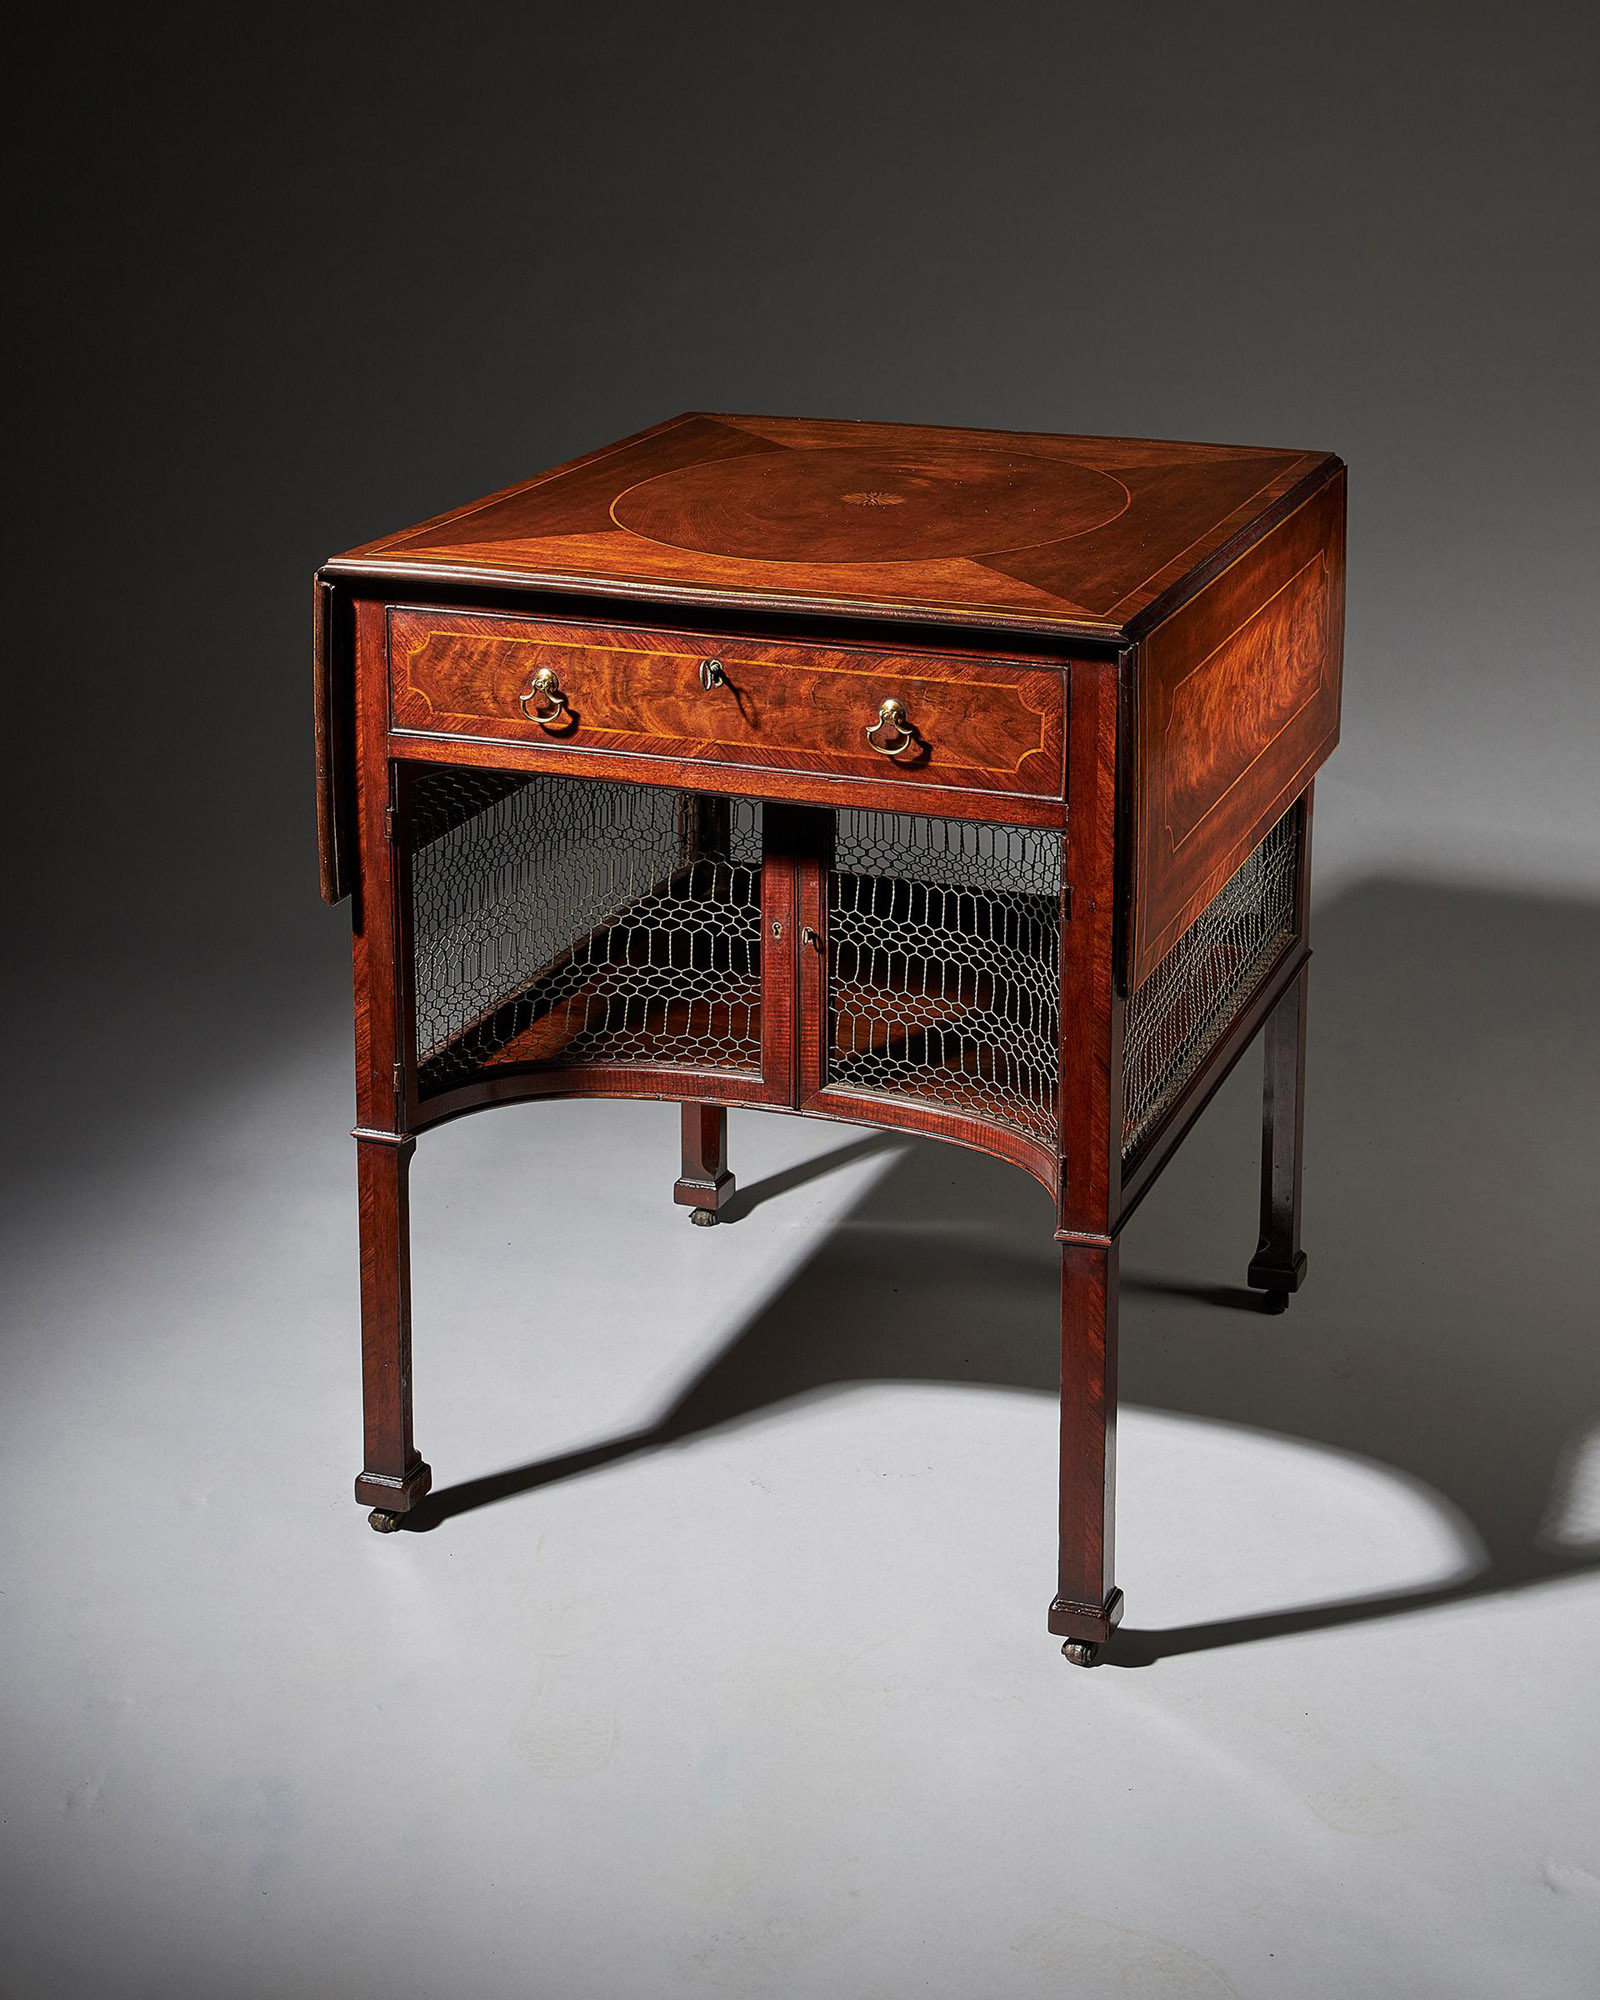 An extremely fine and rare early George III mahogany supper table plausibly by Thomas Chippendale 1